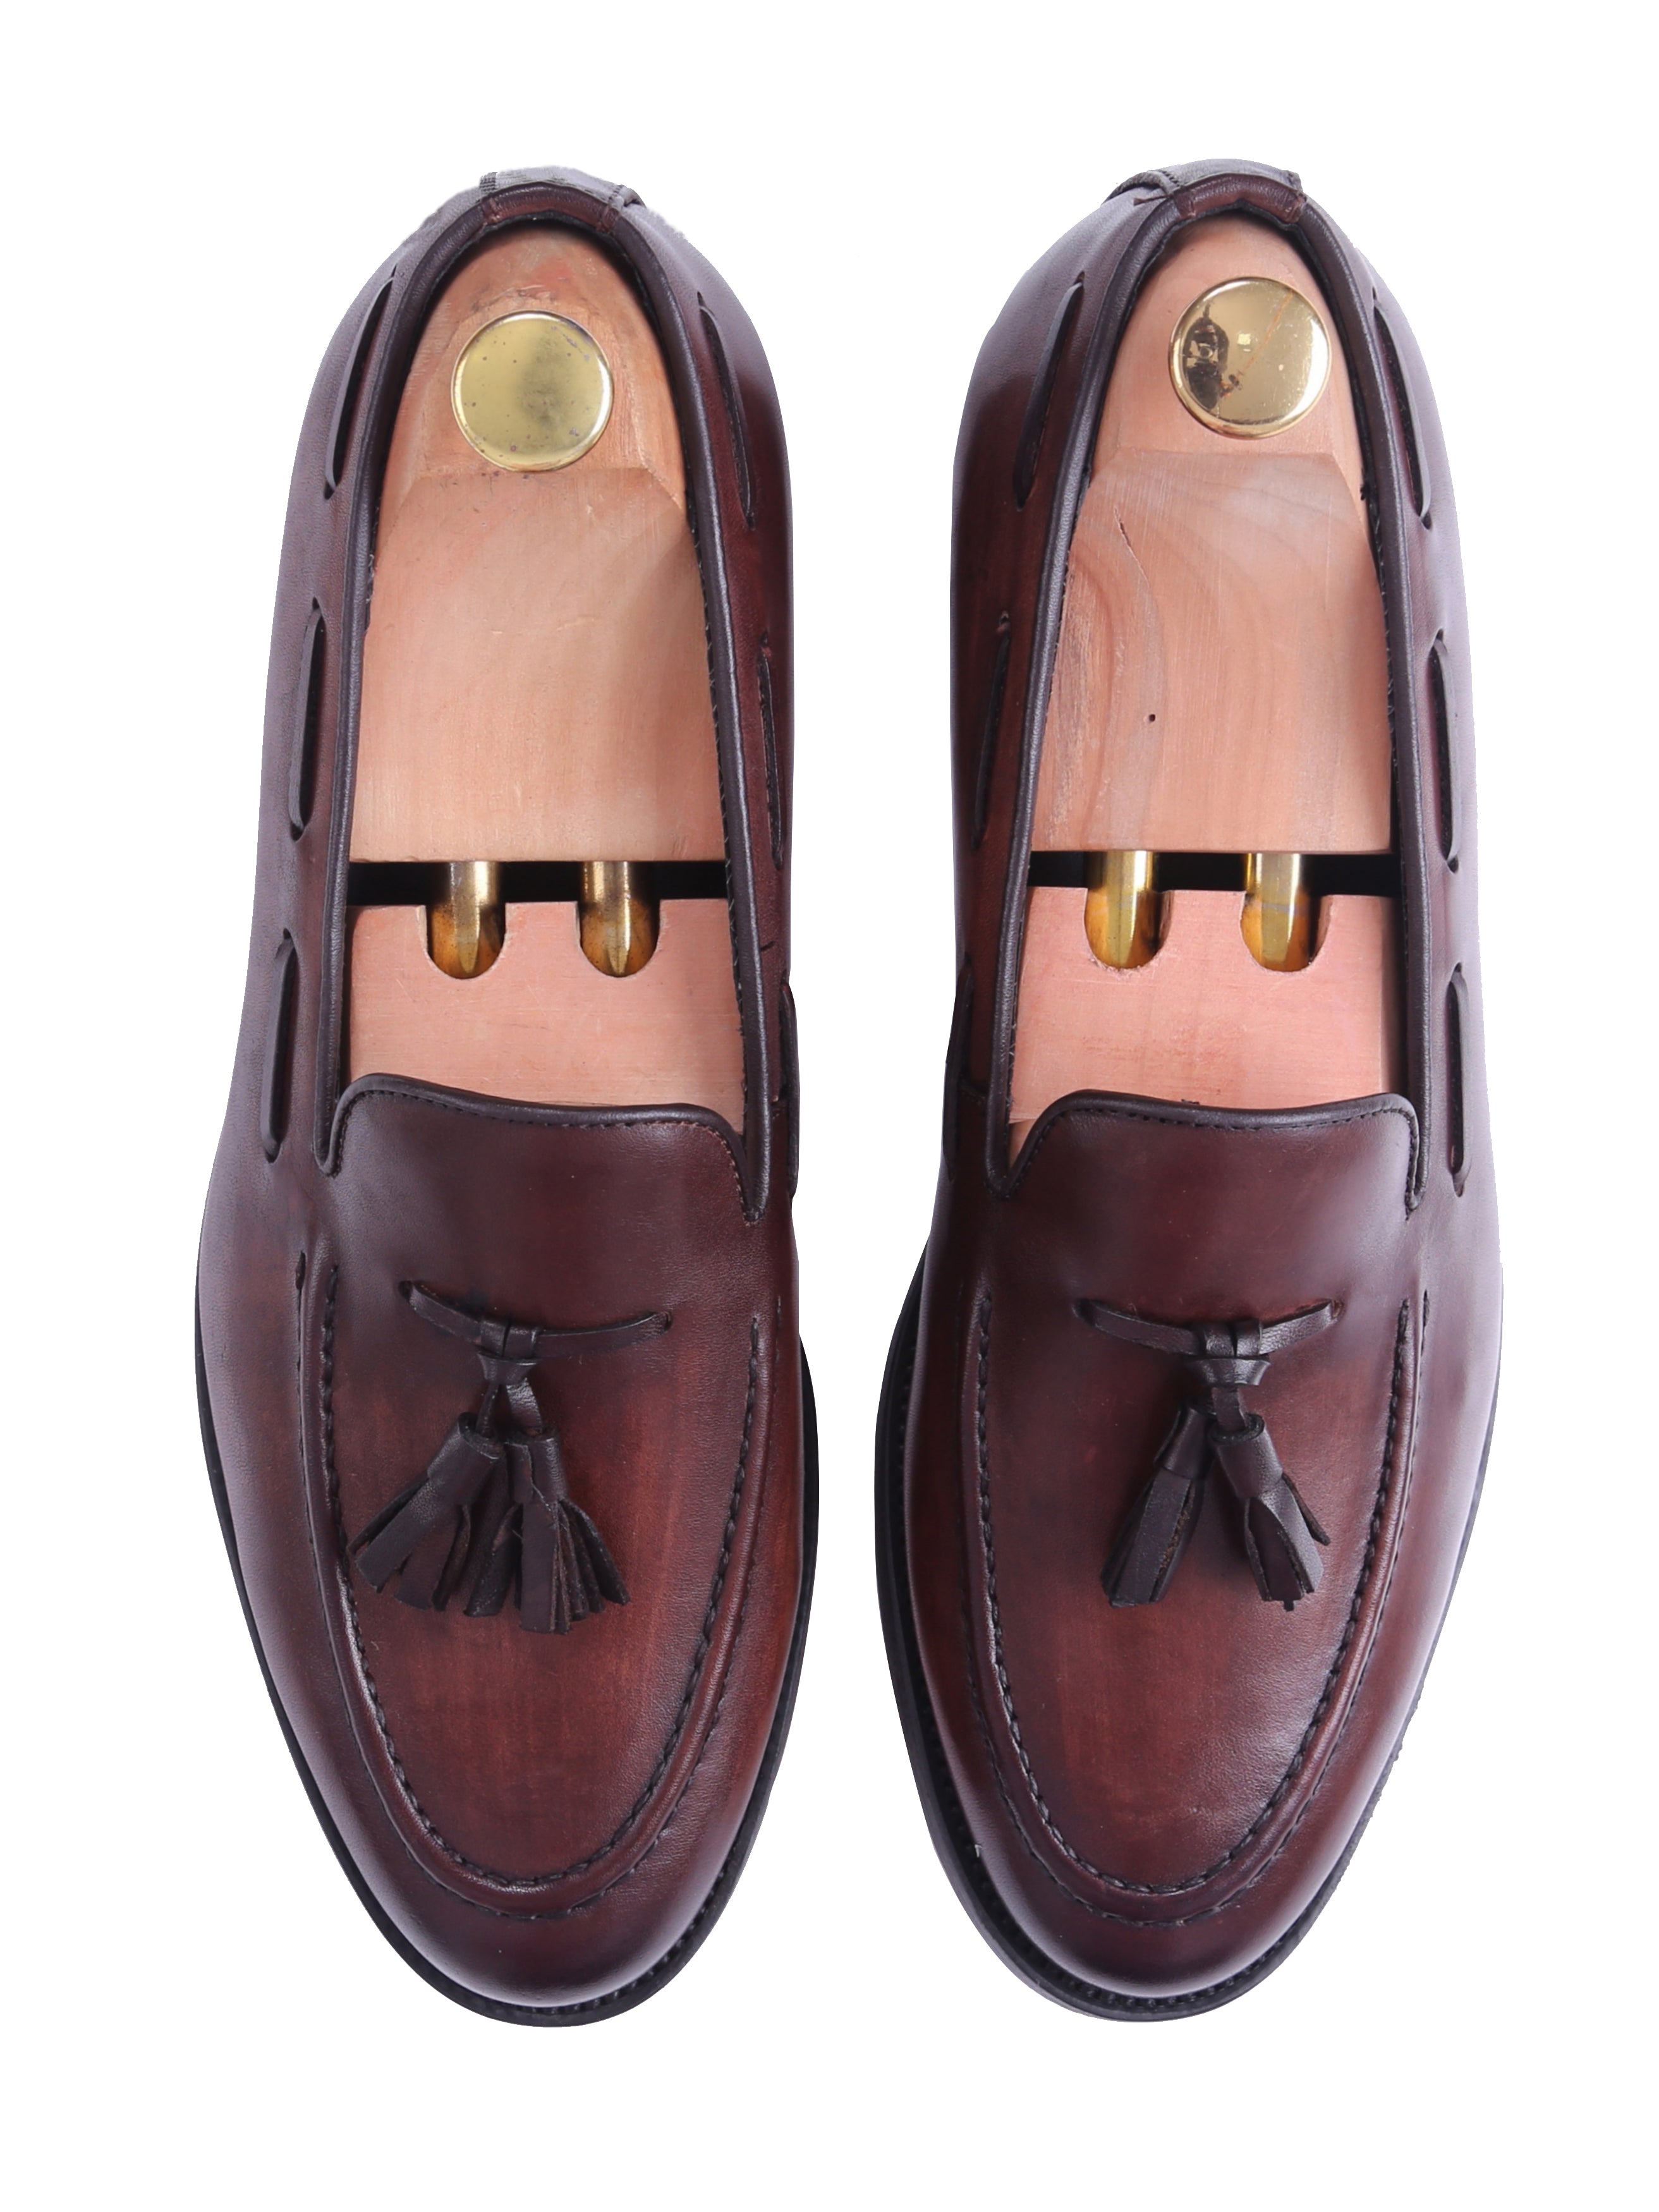 Tassel Loafer - Dark Brown (Hand Painted Patina) - Zeve Shoes